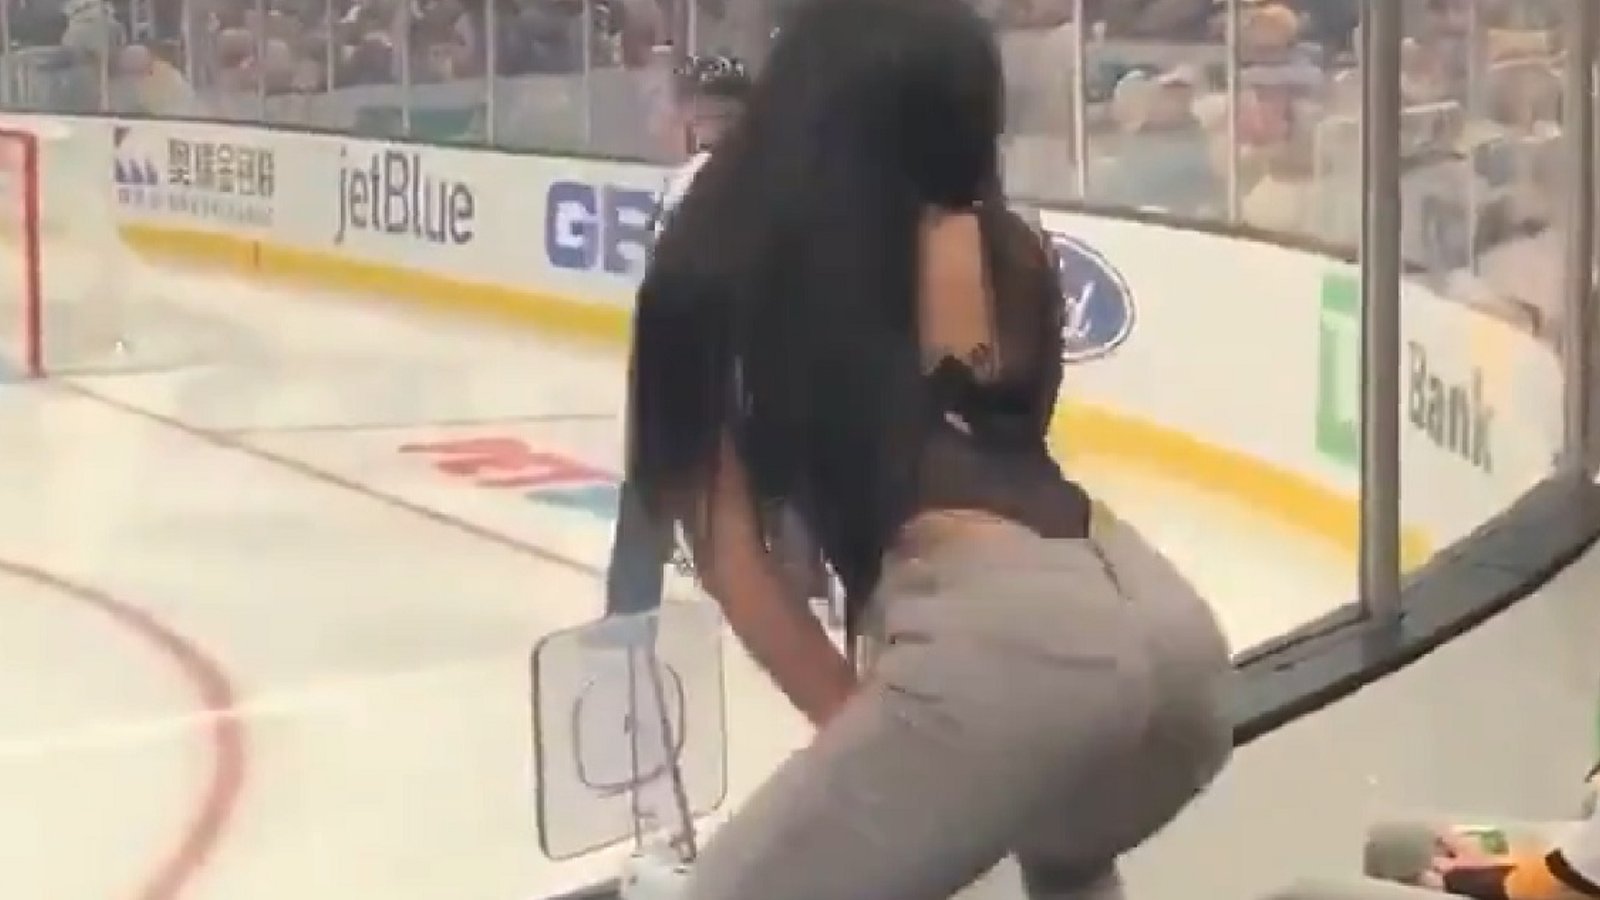 Woman twerks on the glass at TD Garden in the middle of an NHL game.